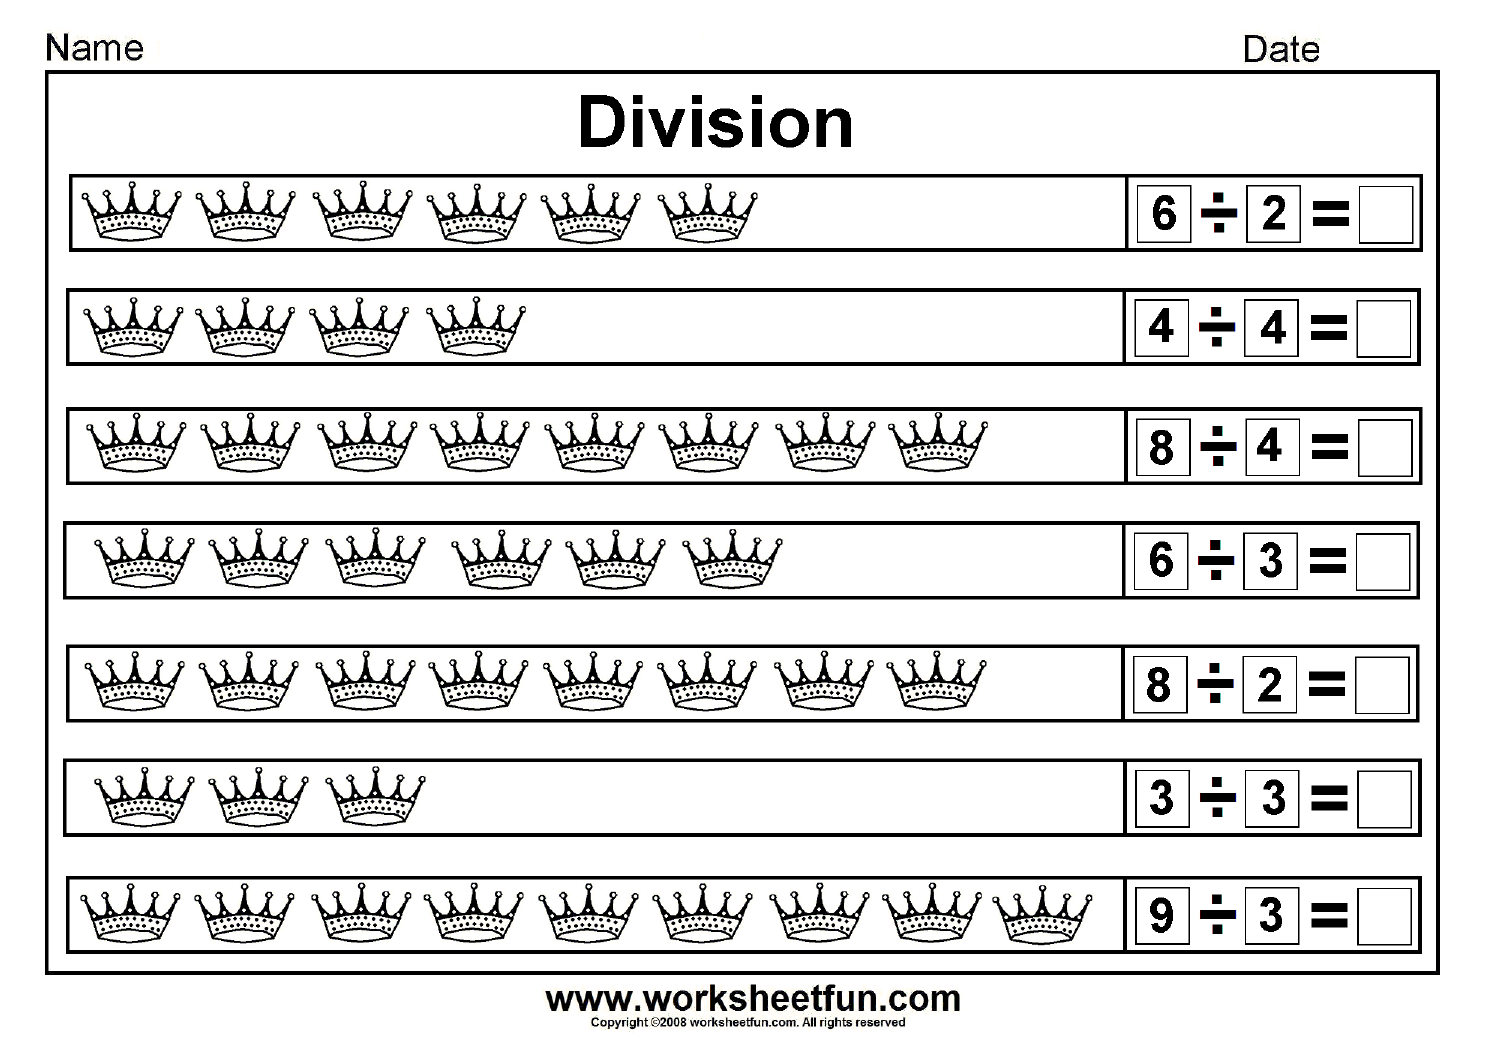 Division Sharing Equally Picture Division 14 Worksheets FREE 